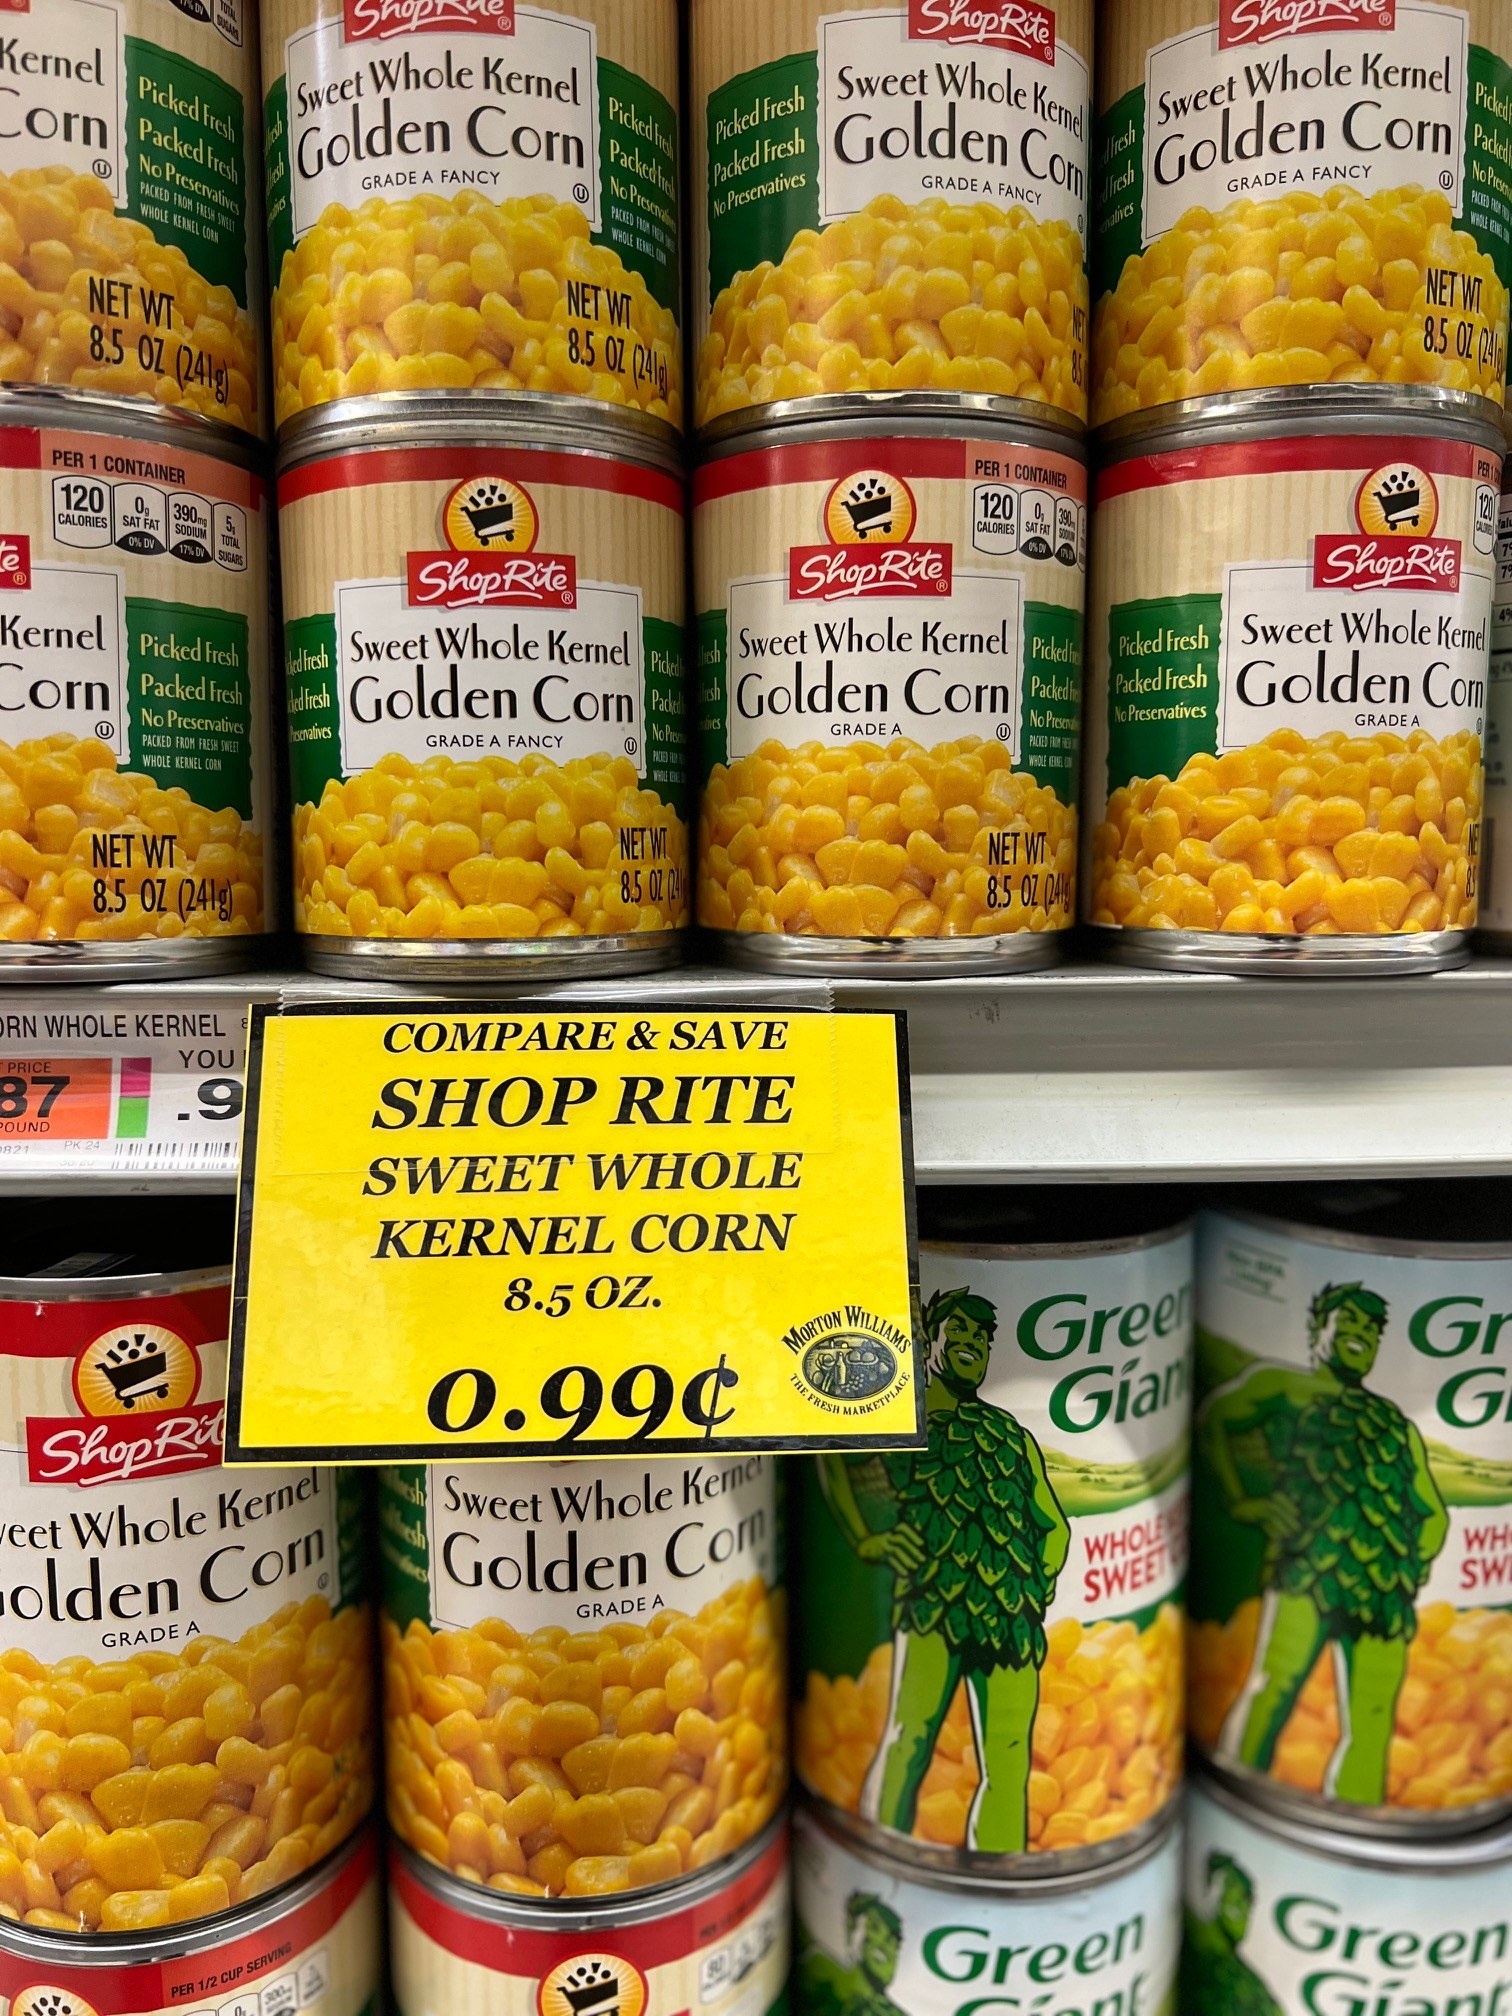 Canned corn on sale.